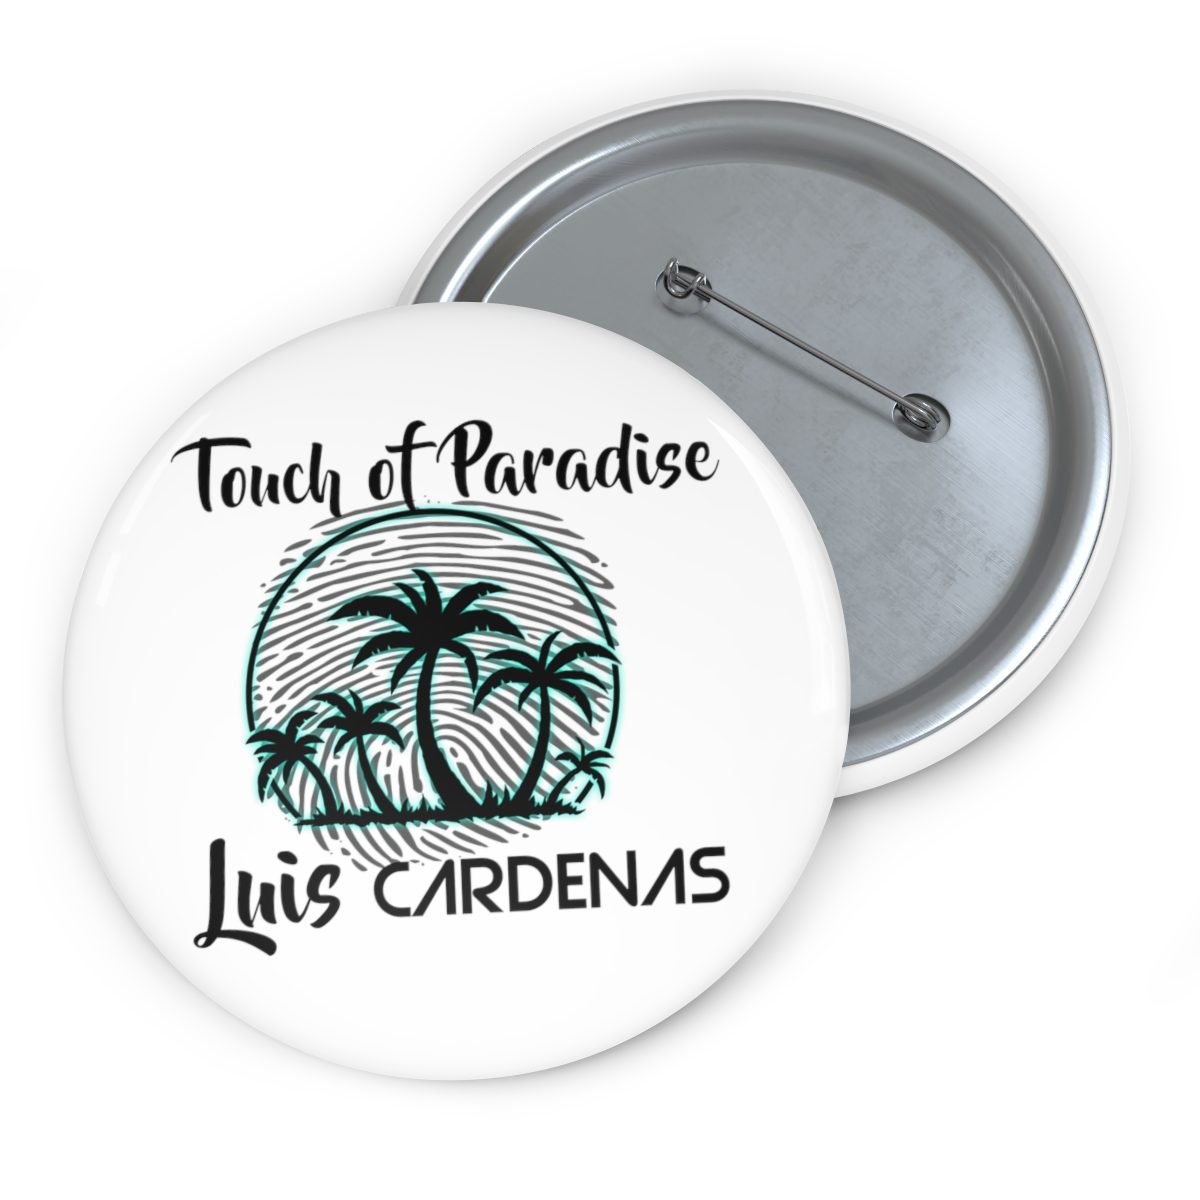 Luis Cardenas – Touch of Paradise Pin Buttons (White)